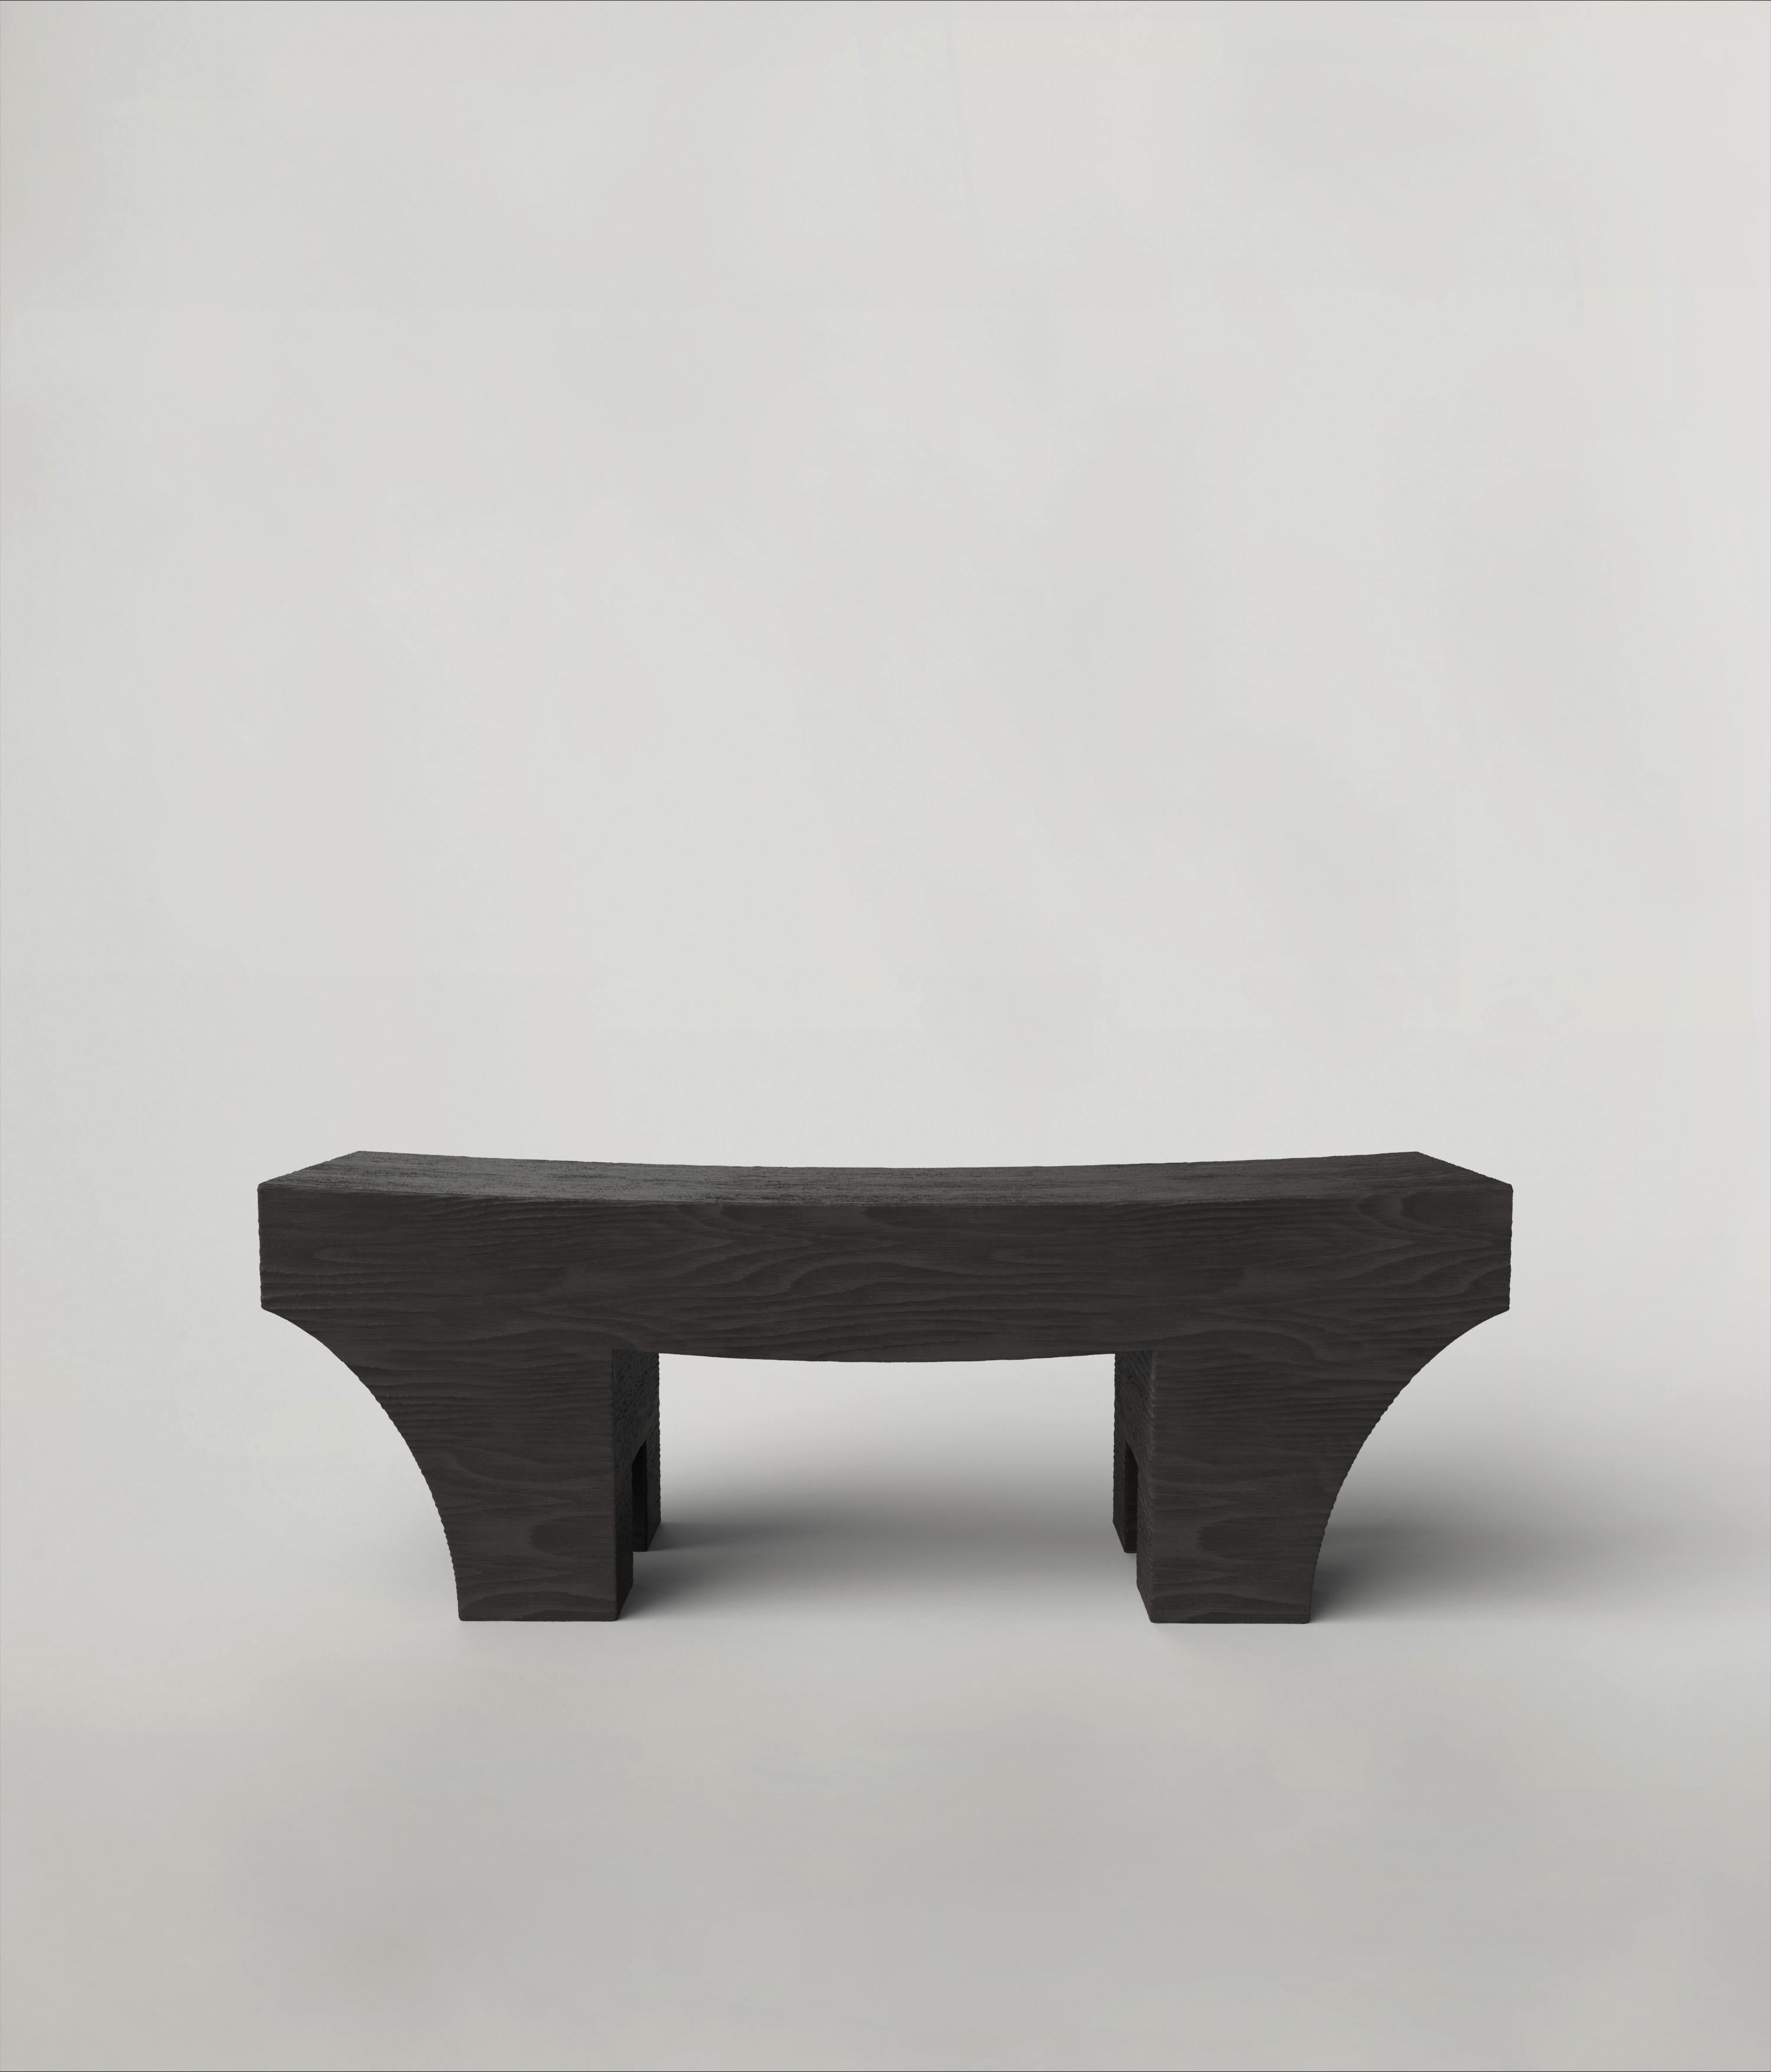 Mhono V2 bench by Edizione Limitata
Limited edition of 150 pieces. Signed and numbered.
Dimensions: D 120x W 35 x H 43 cm
Materials: charred cedar wood

This contemporary collection is a product of Italian craftmanship, starting entirely from